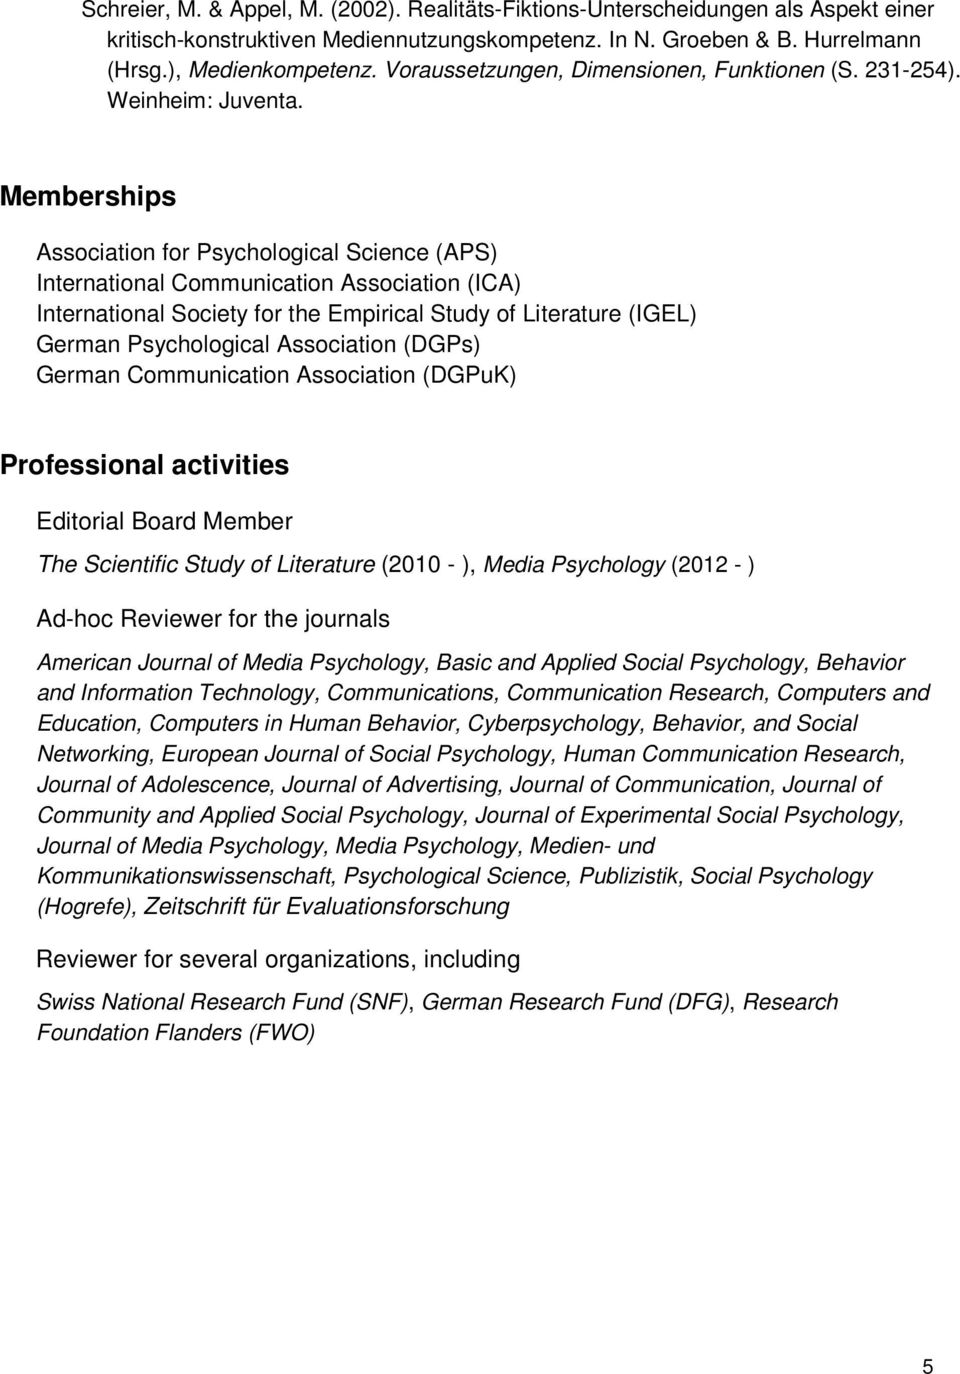 Memberships Association for Psychological Science (APS) International Communication Association (ICA) International Society for the Empirical Study of Literature (IGEL) German Psychological